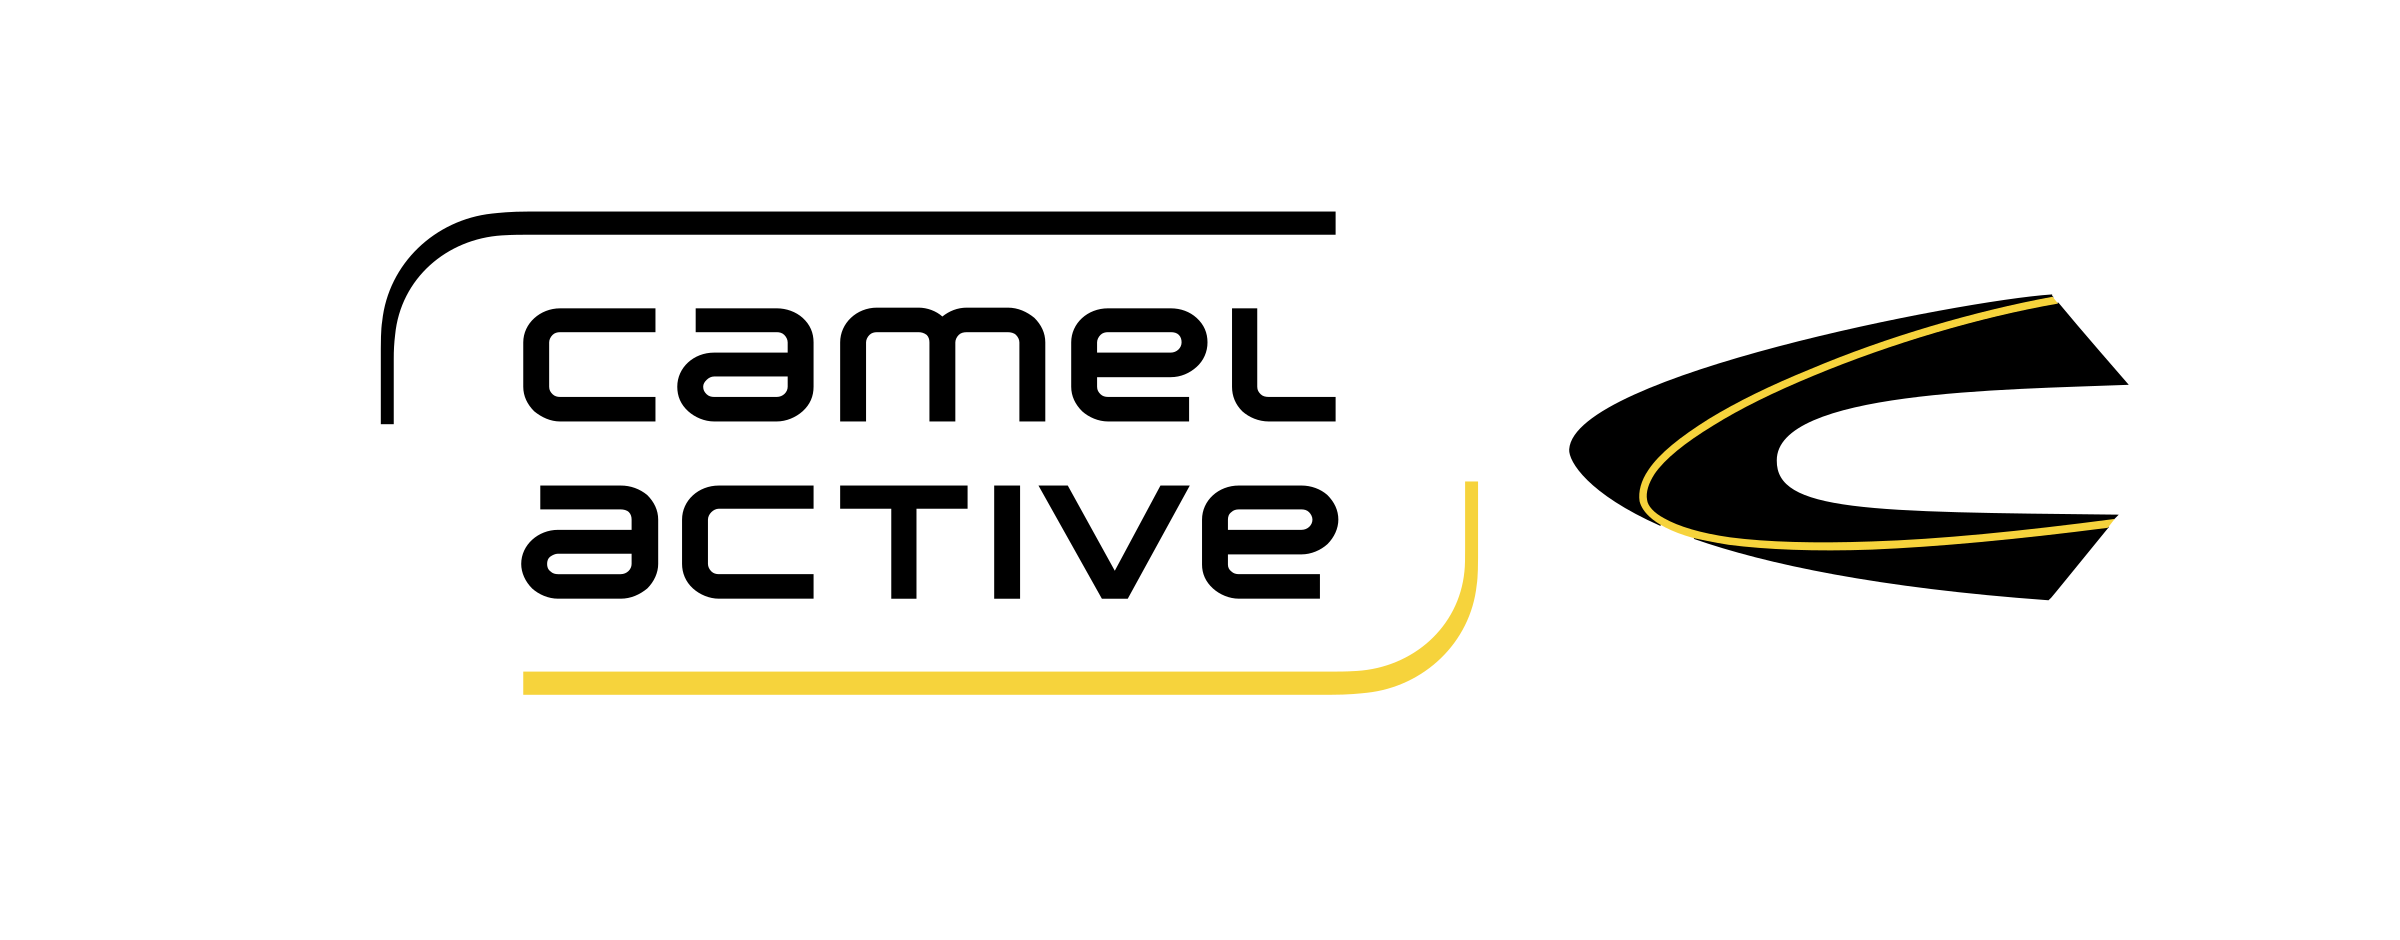 Image: Camel Active